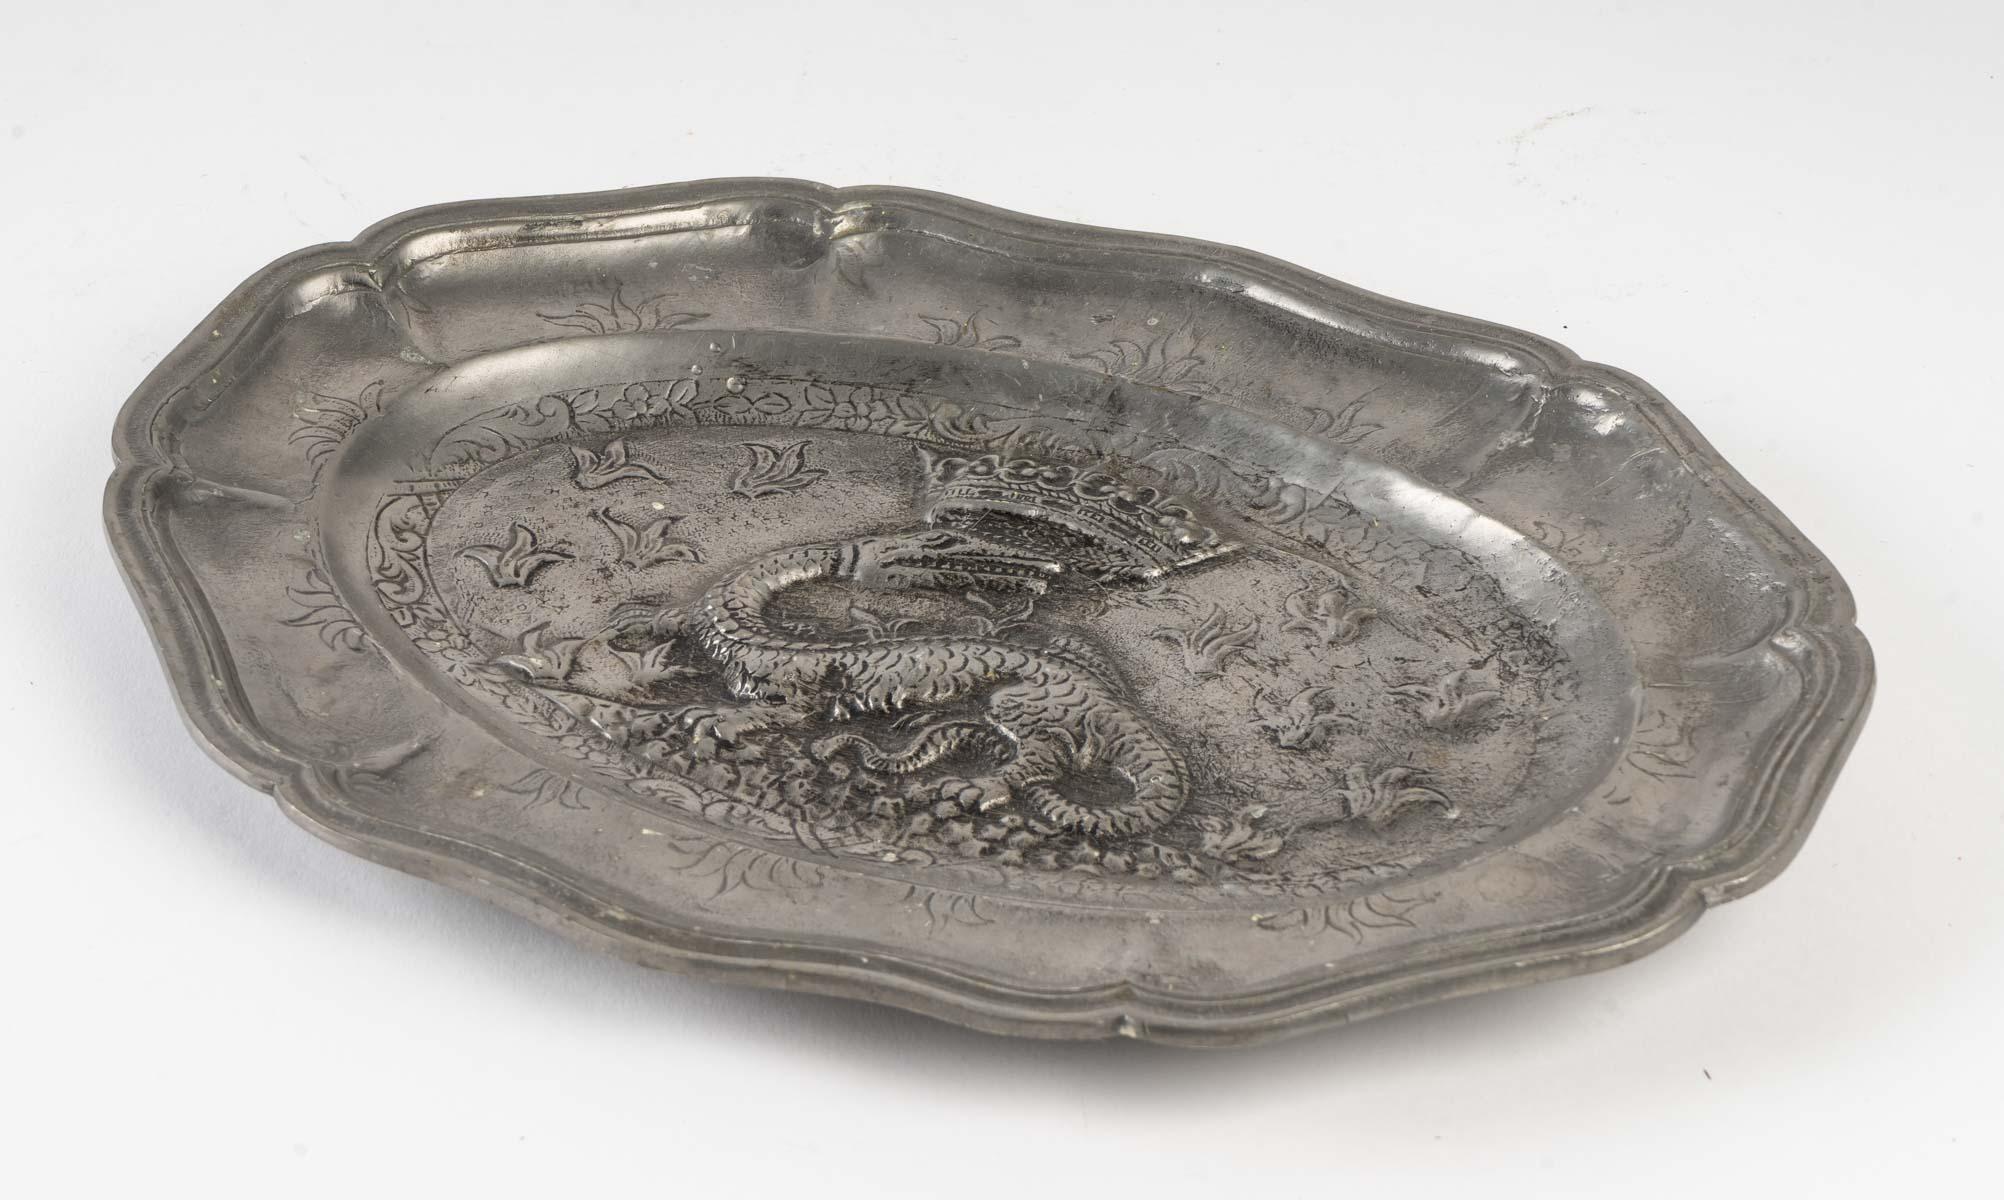 Decorative pewter tray with a crowned dragon motif.
Measures: H 2 cm, W 28 cm, D 20 cm.